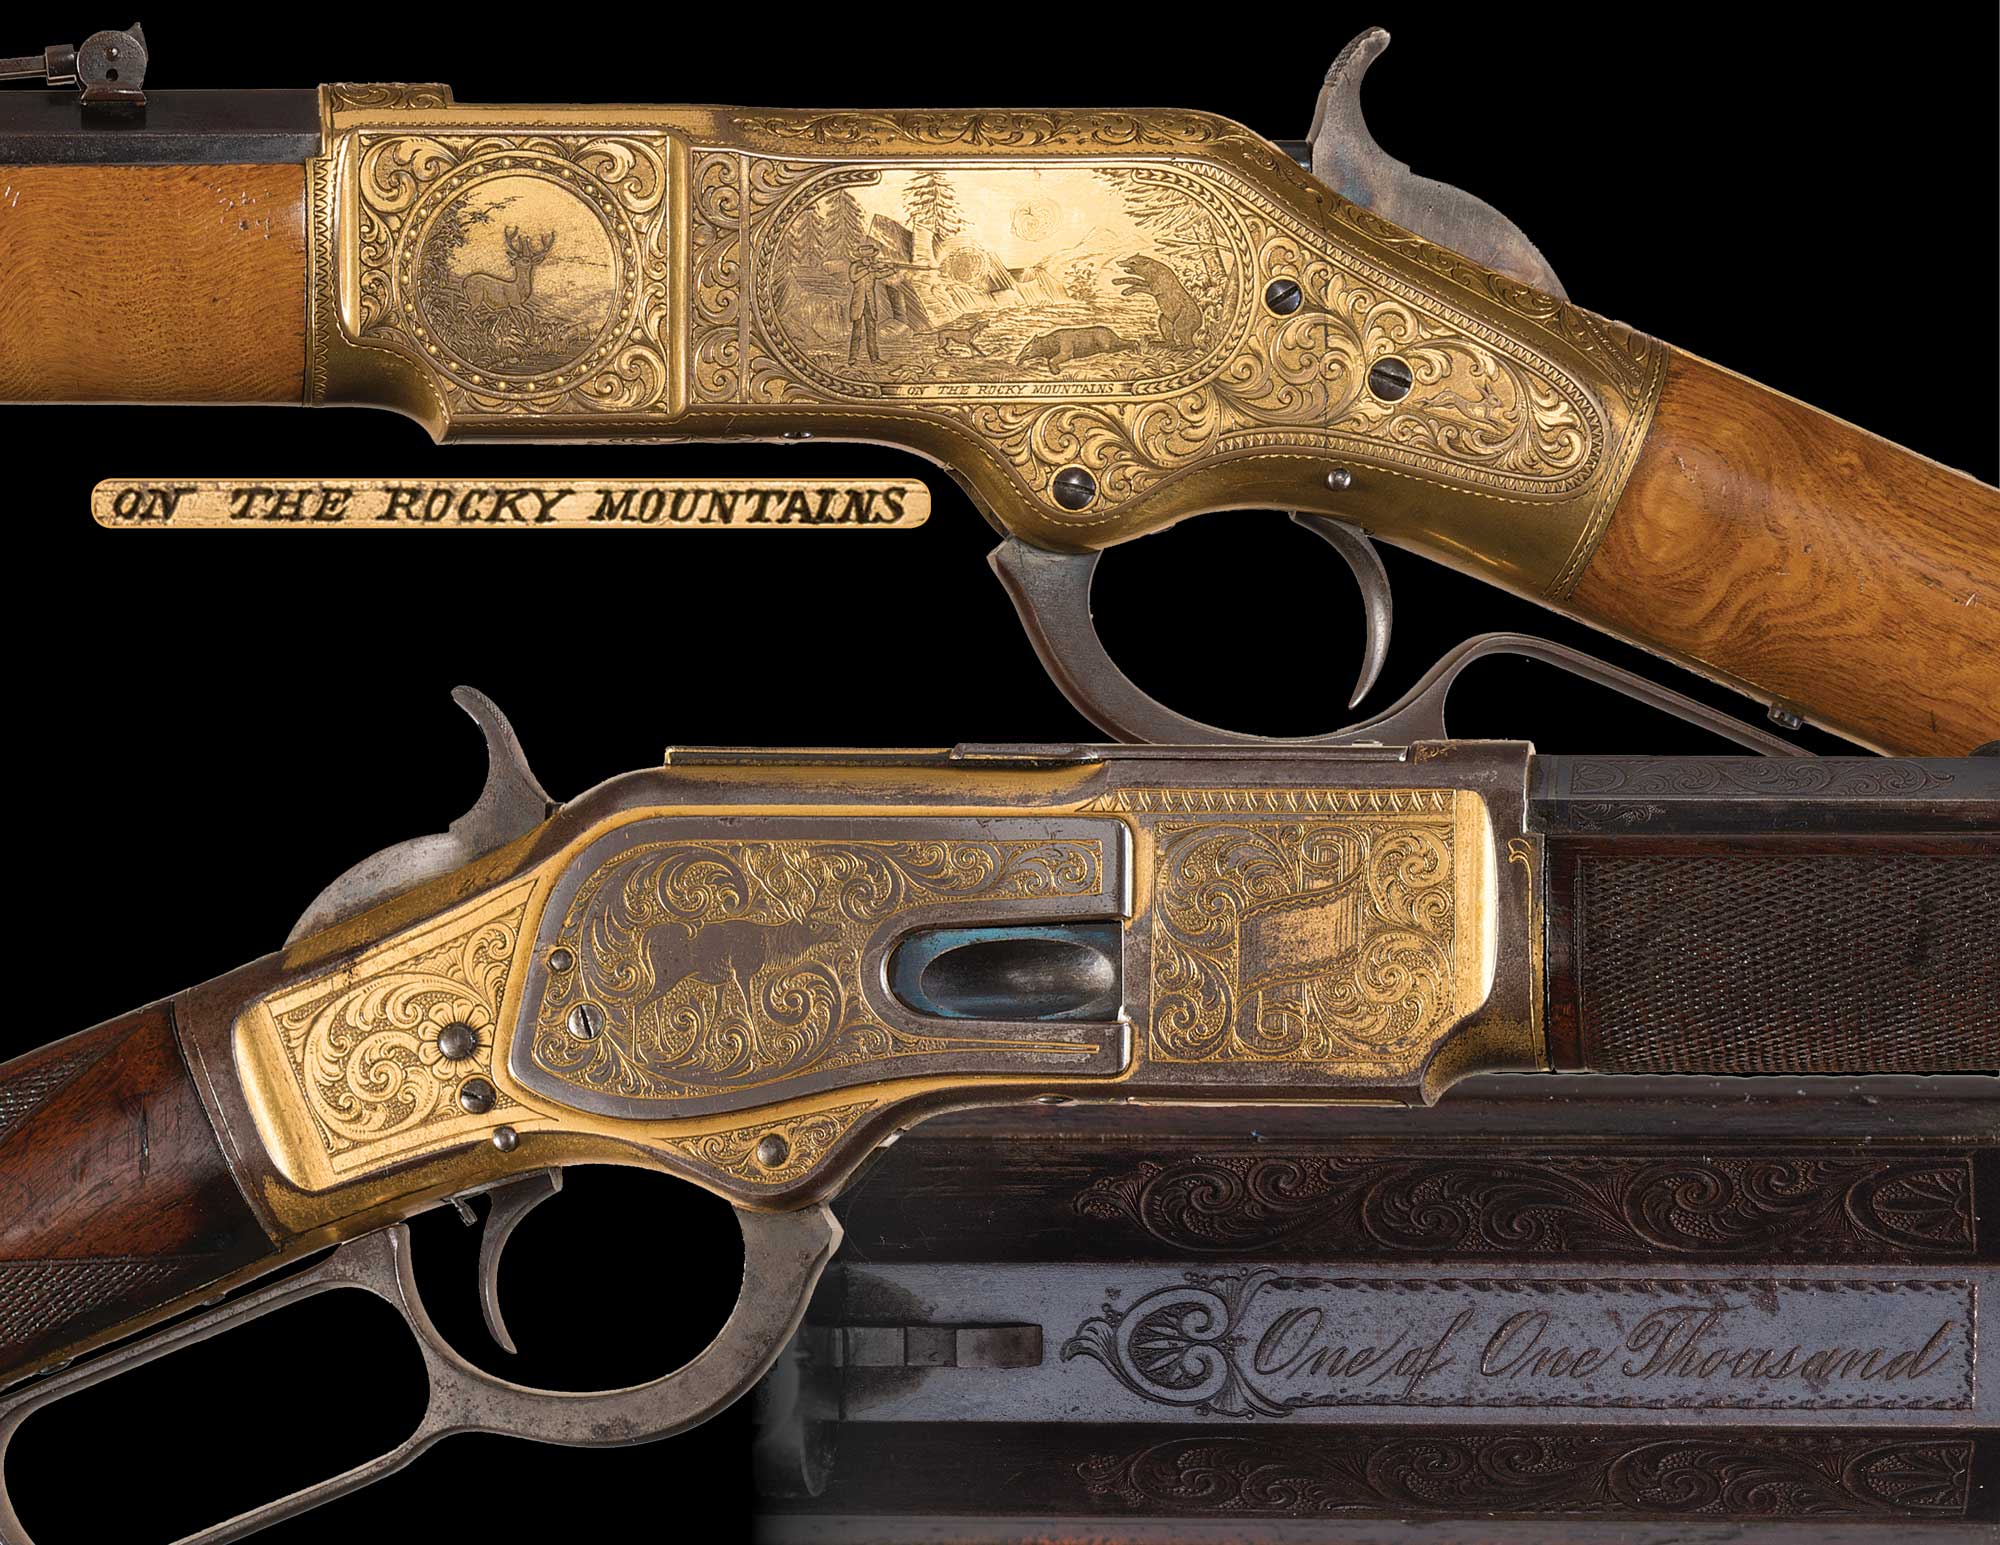 Big Firearms Collectors & Big History Spur May Results – $16.1 Million